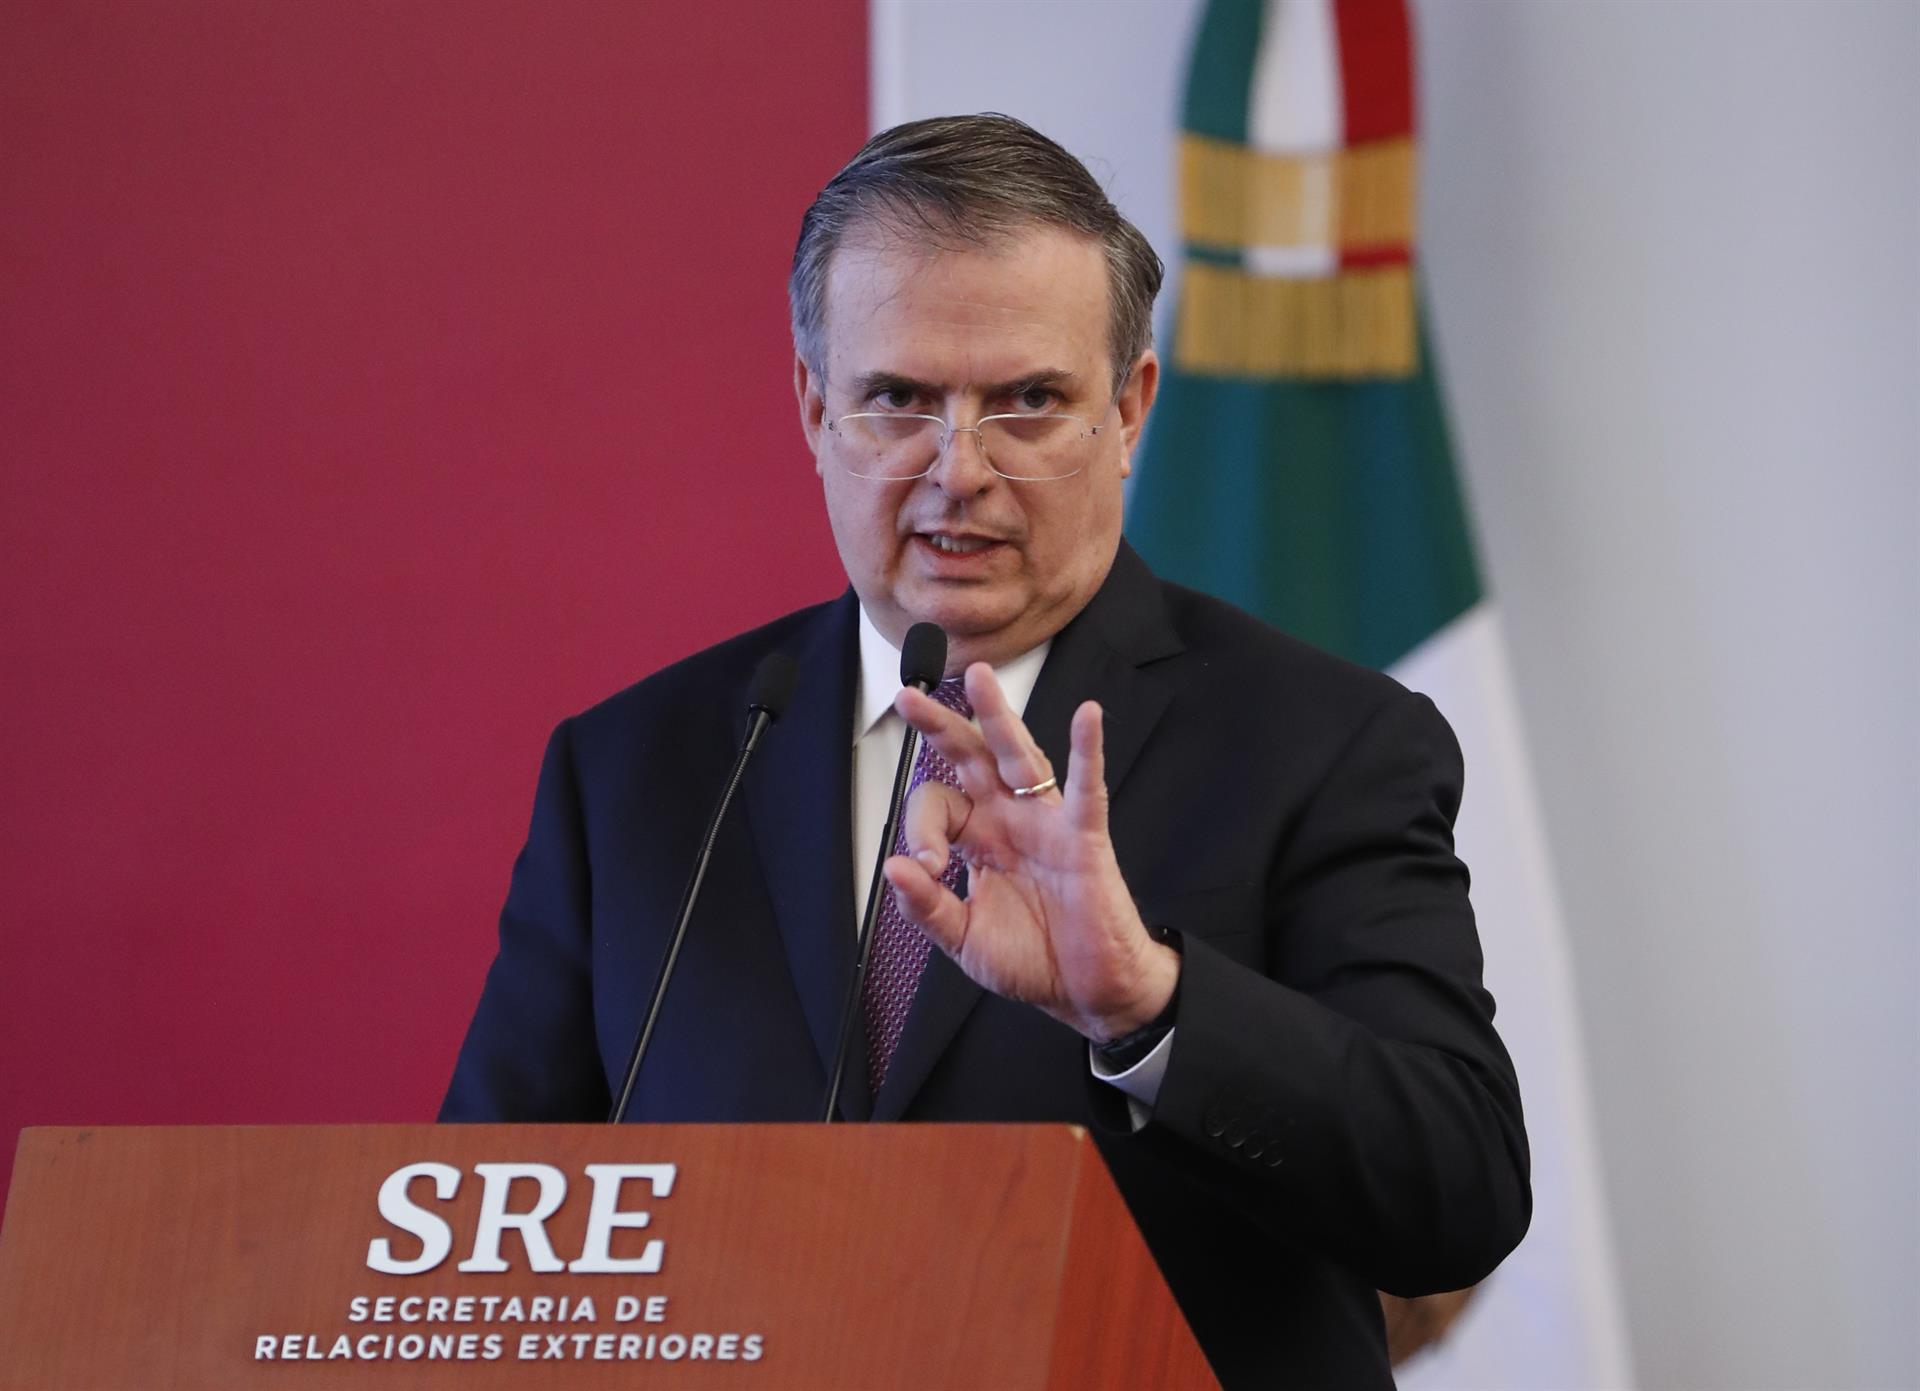 Ebrard defends AMLO’s position at Summit of the Americas